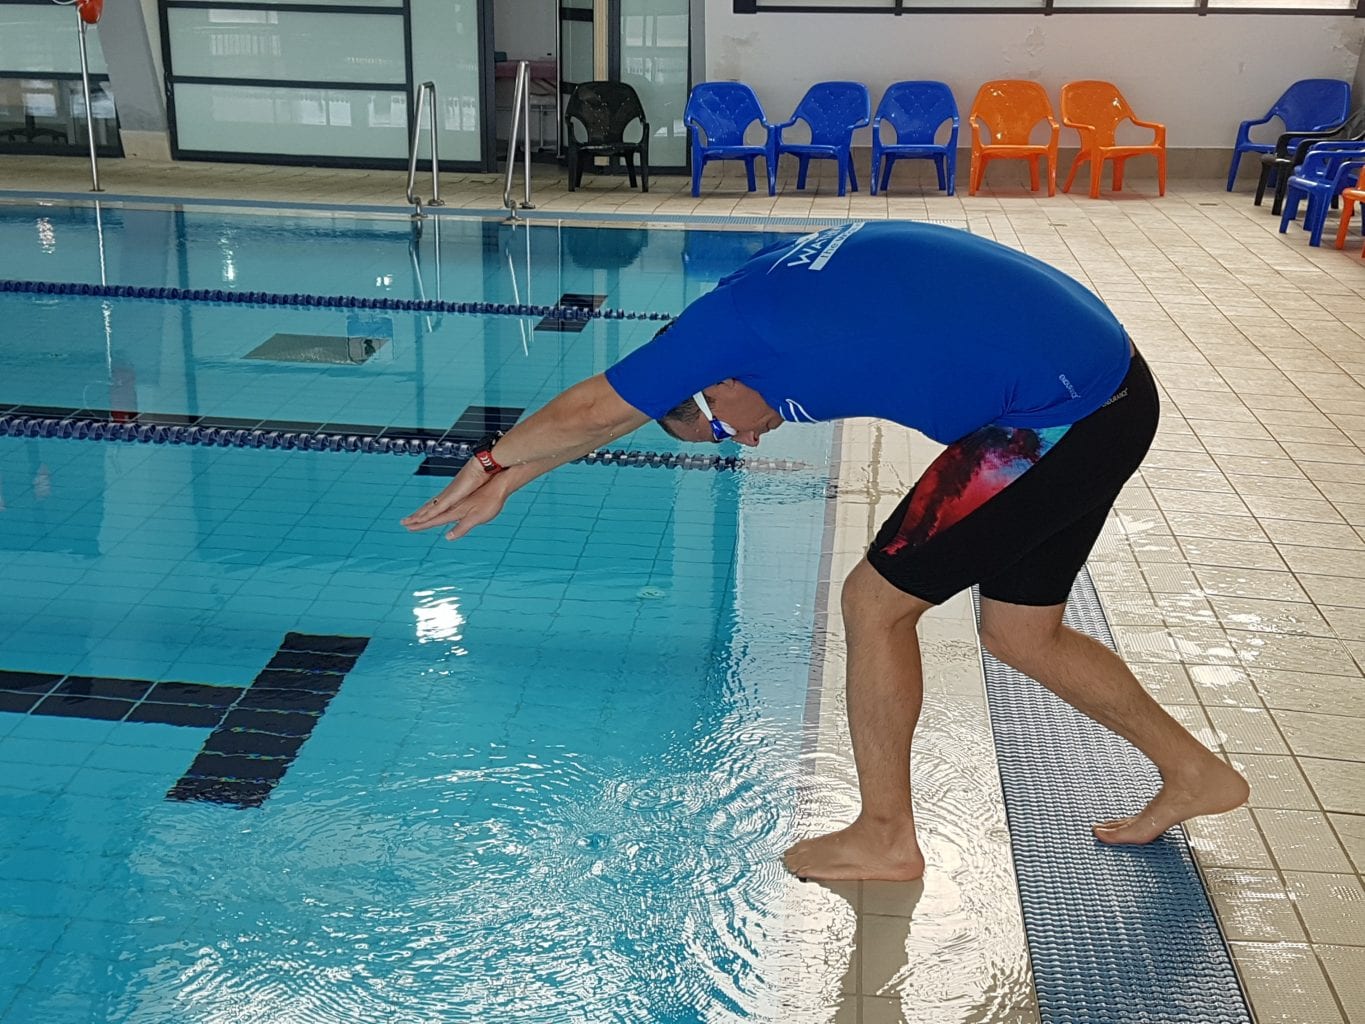 10 Steps to dive like a pro for beginners - WEST Swimming Technique